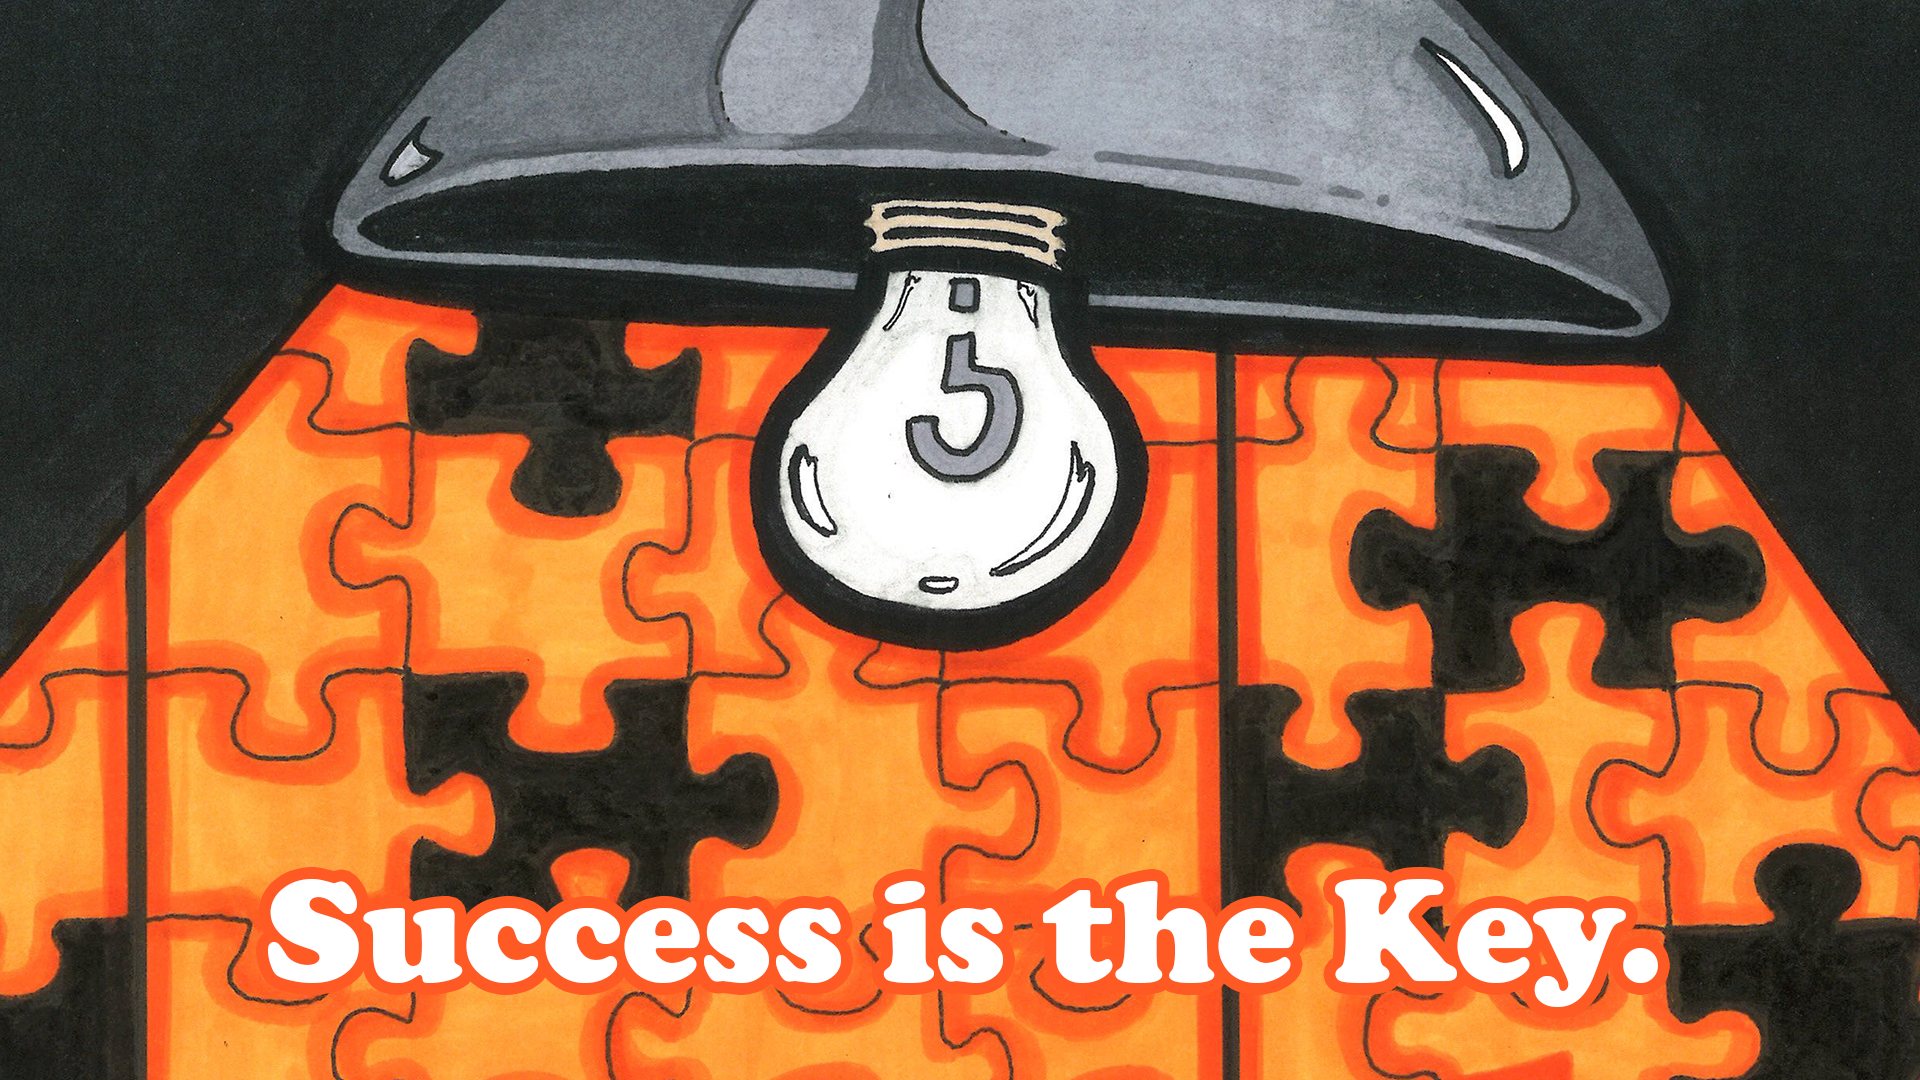 Success is the Key.